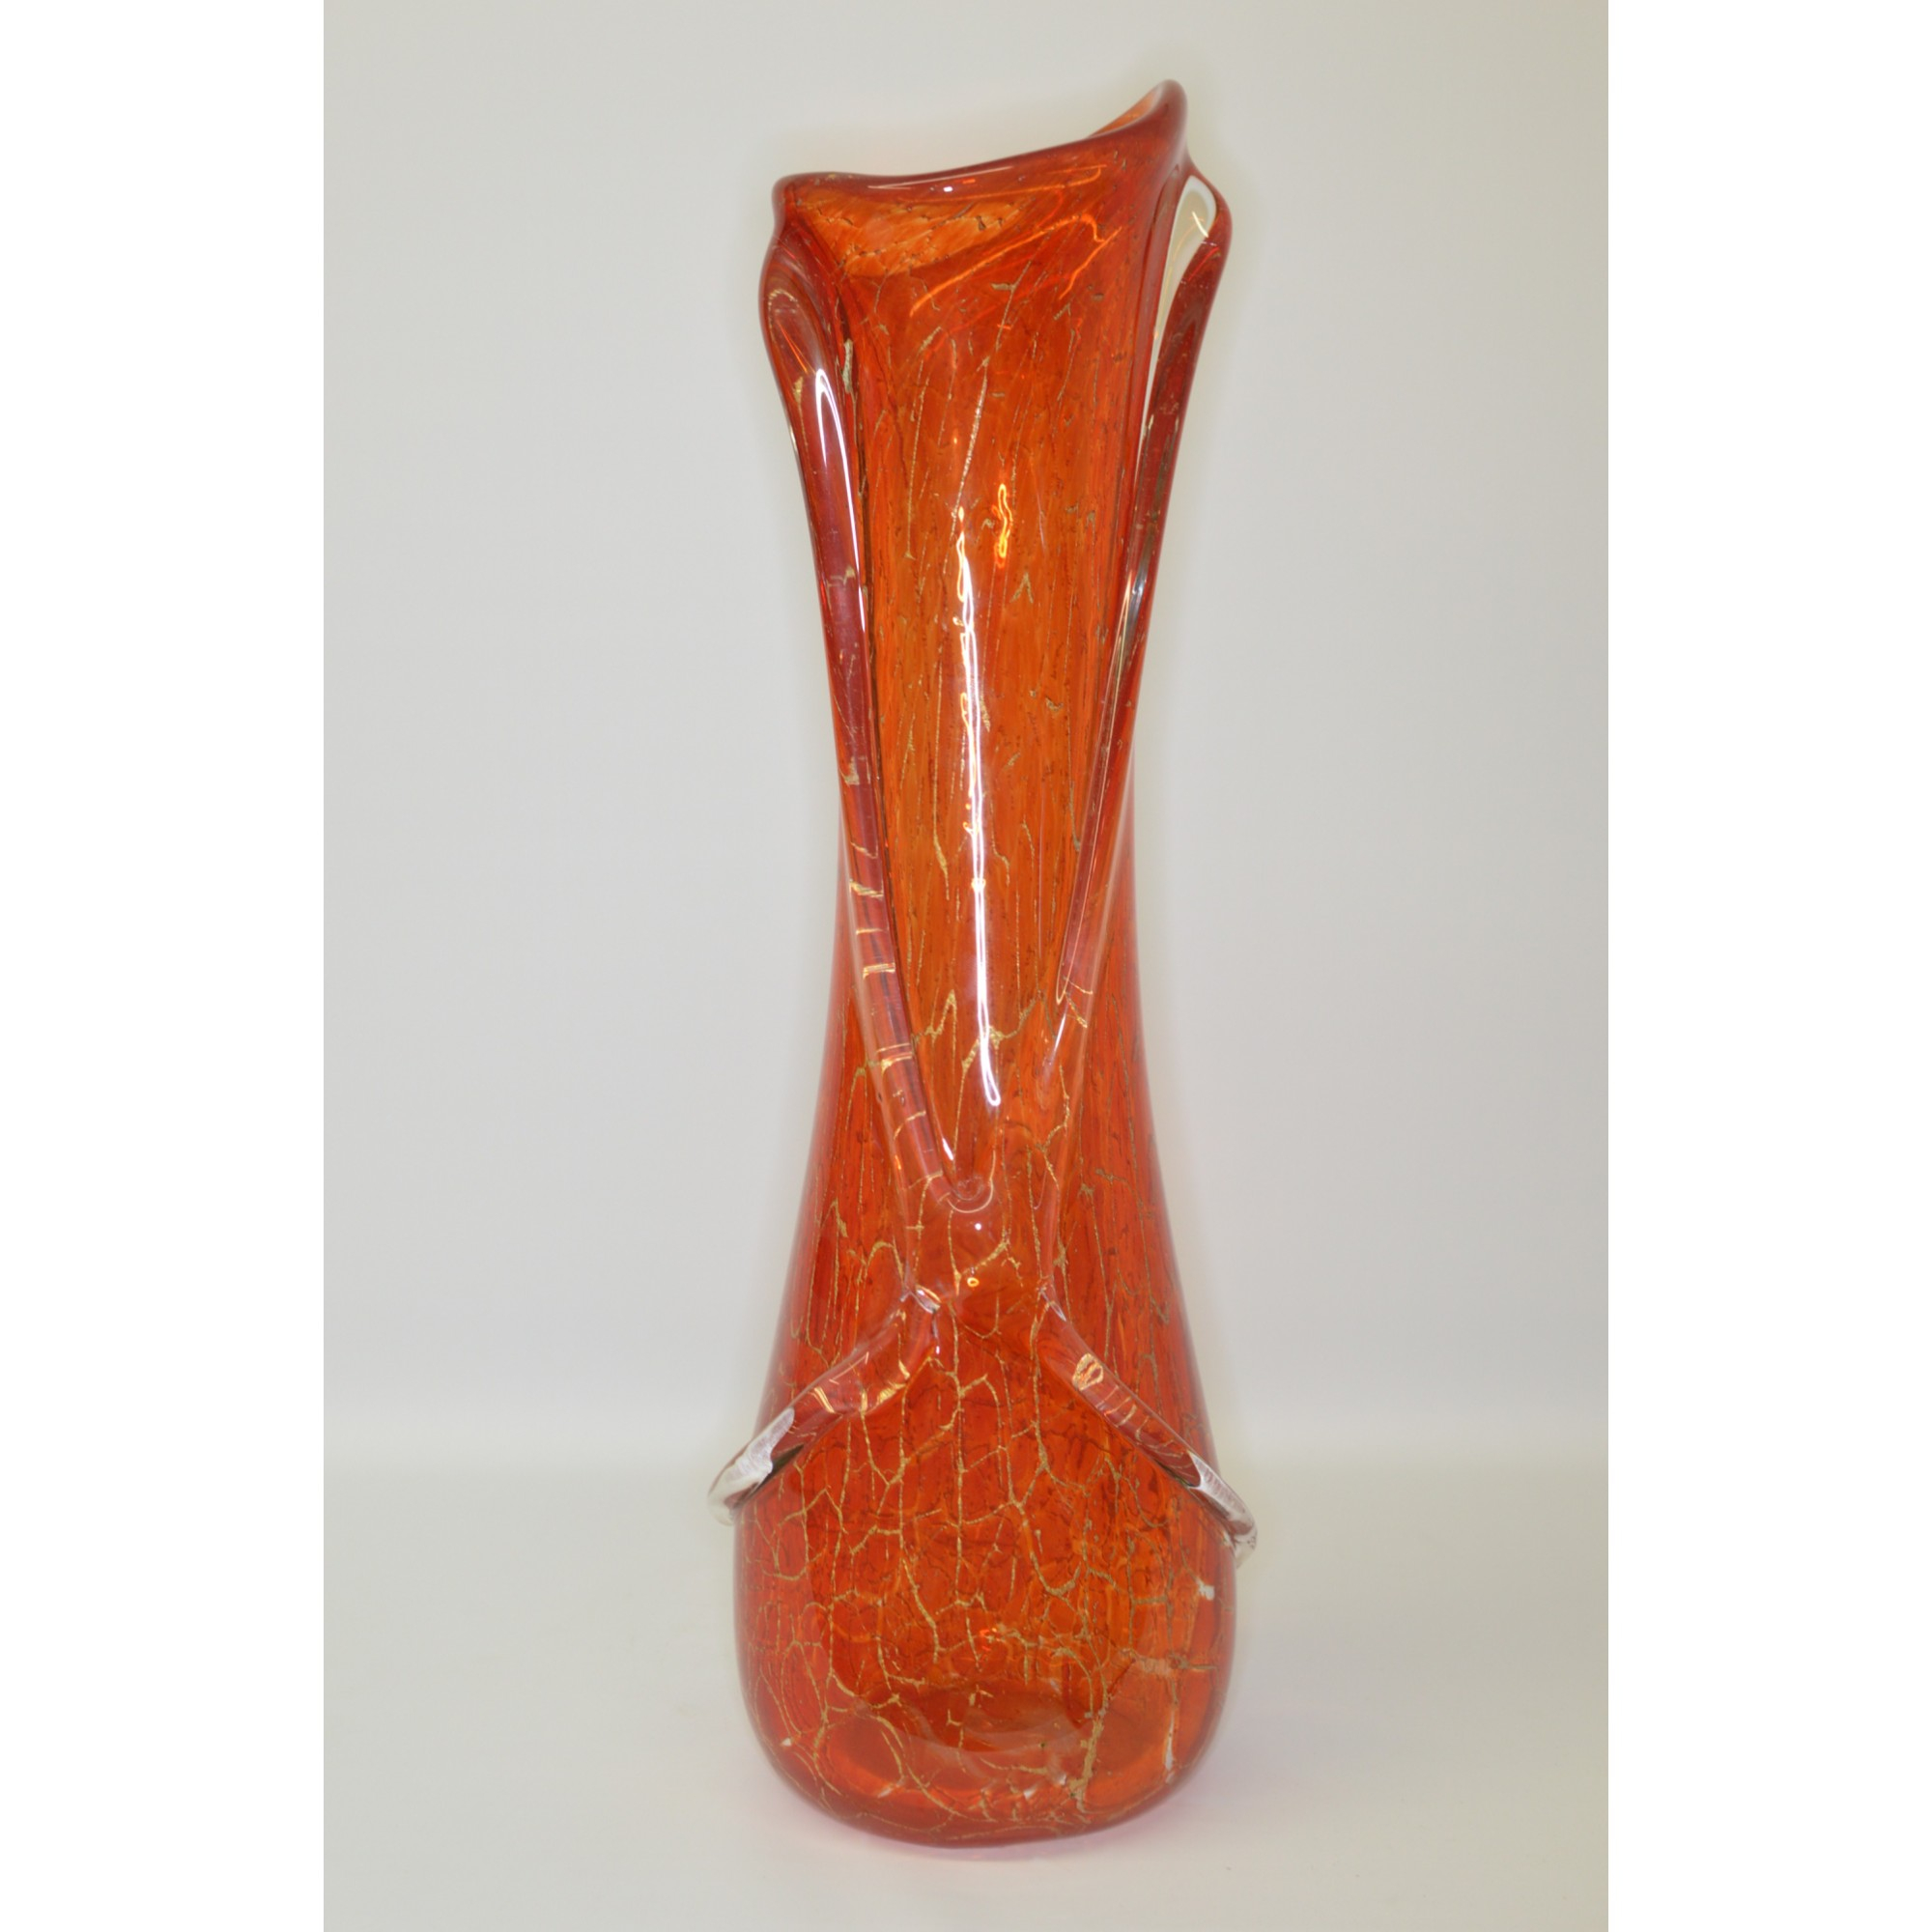 Tall Floor Vase Suspenders Deep Orange With A Golden Spiderweb Collection Coral H 80 Cm 31 within sizing 2000 X 2000